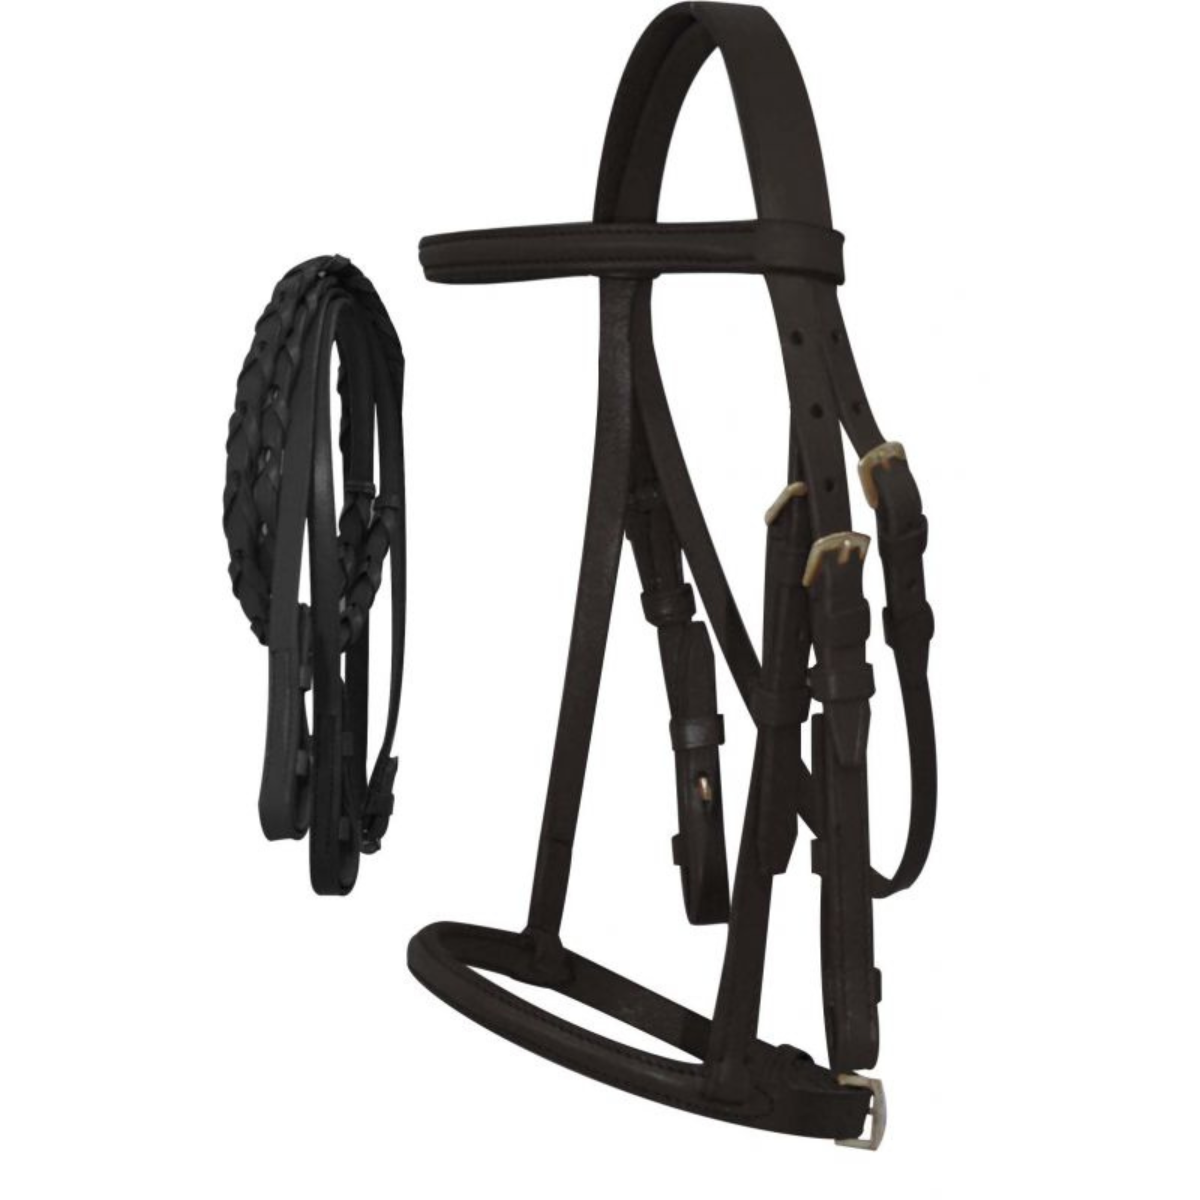 Pony Size English headstall with raised browband and braided leather reins - Double T Saddles